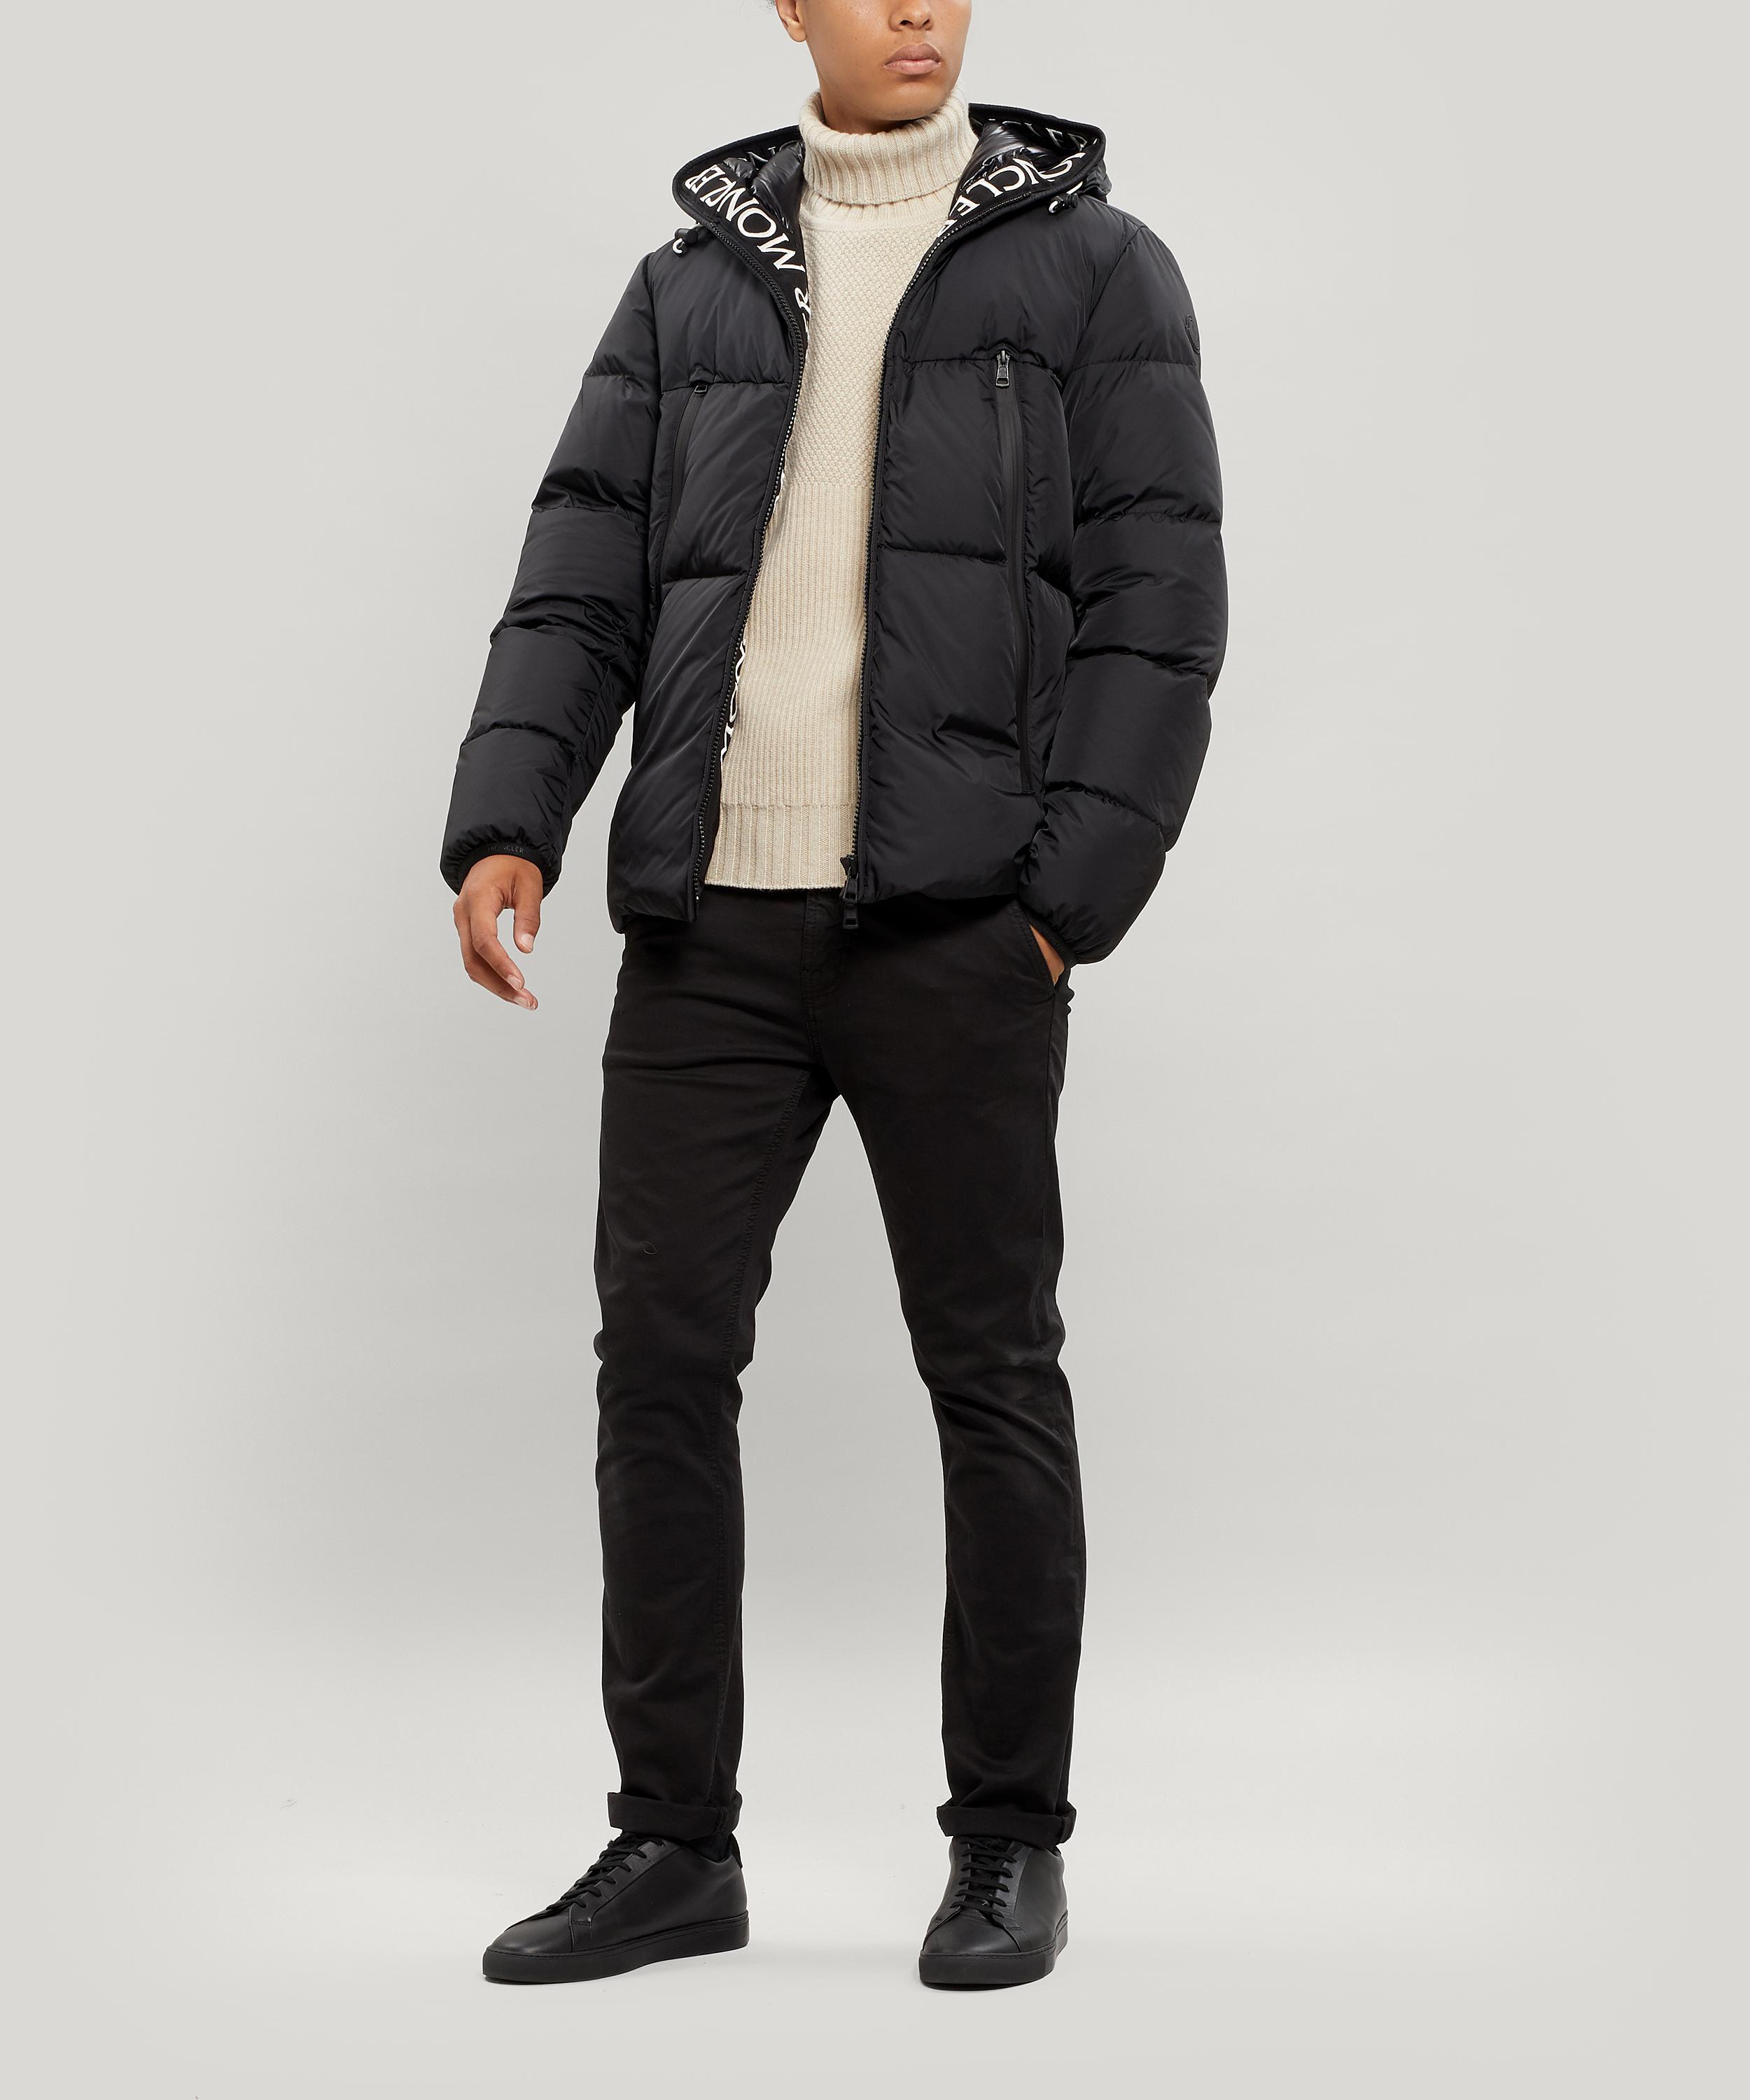 Moncler Synthetic Text-trimmed Hooded Puffer Jacket in Black for Men - Lyst